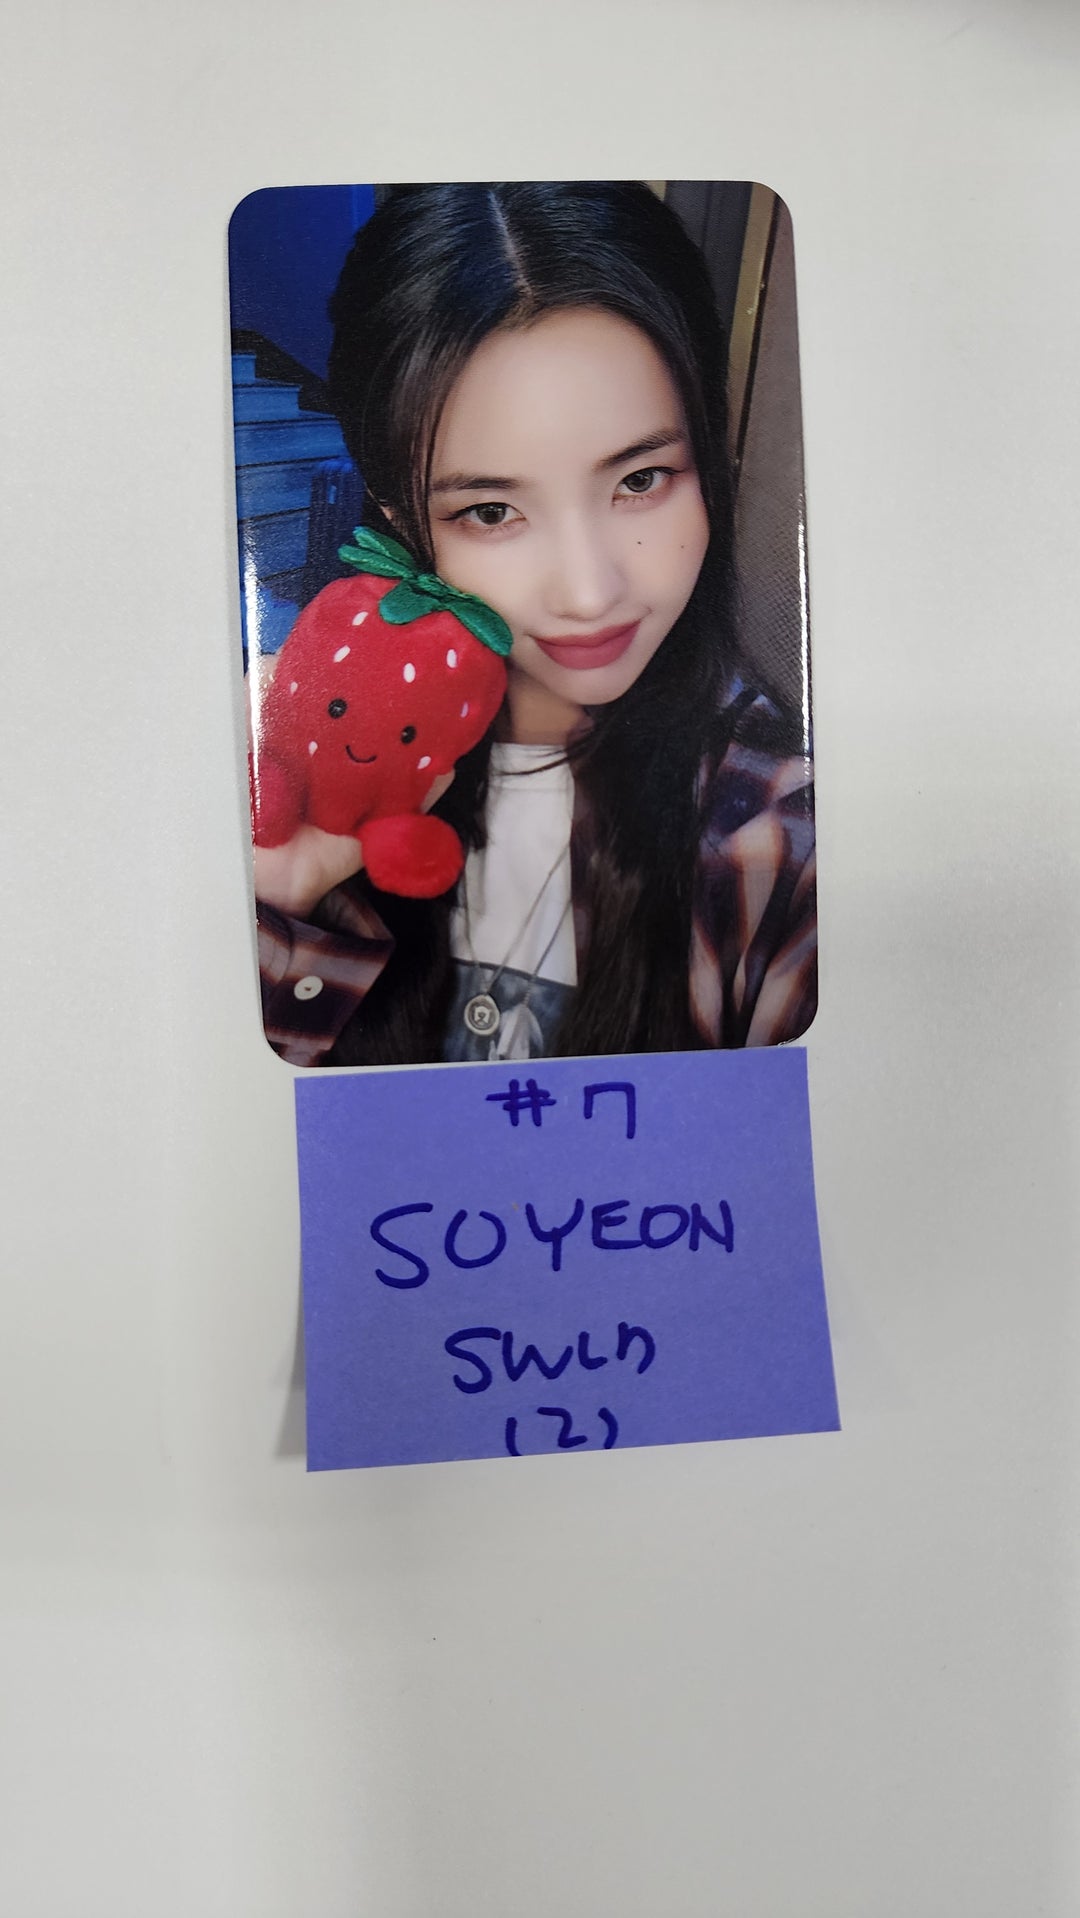 (g) I-DLE "2" 2nd Full Album - Soundwave Lucky Draw Event Photocard [24.4.8]